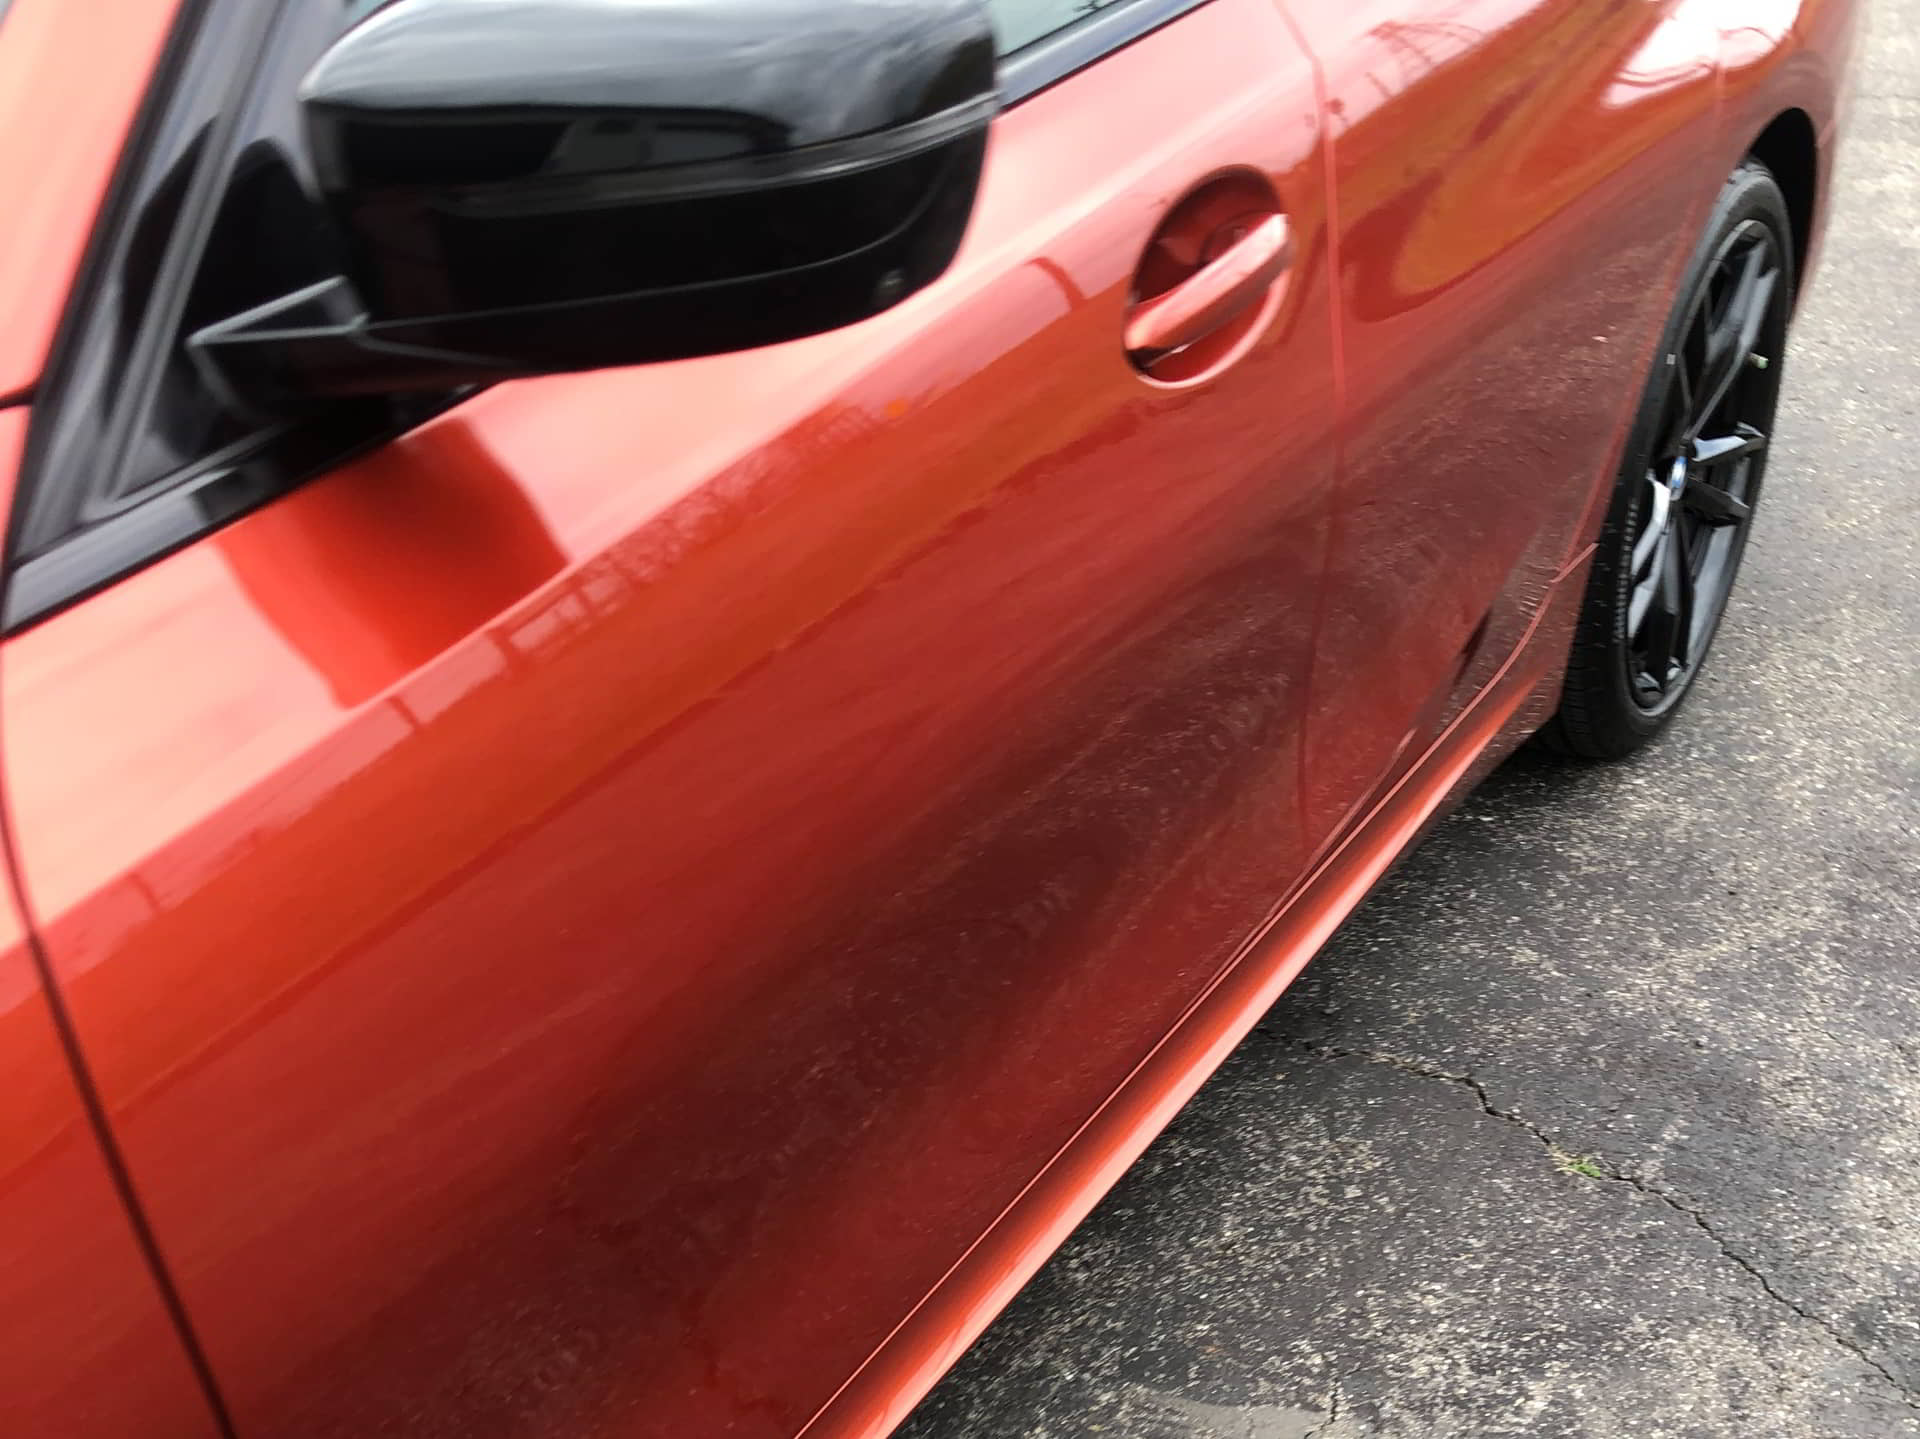 How Much Does It Cost To Ceramic Coat A Car?